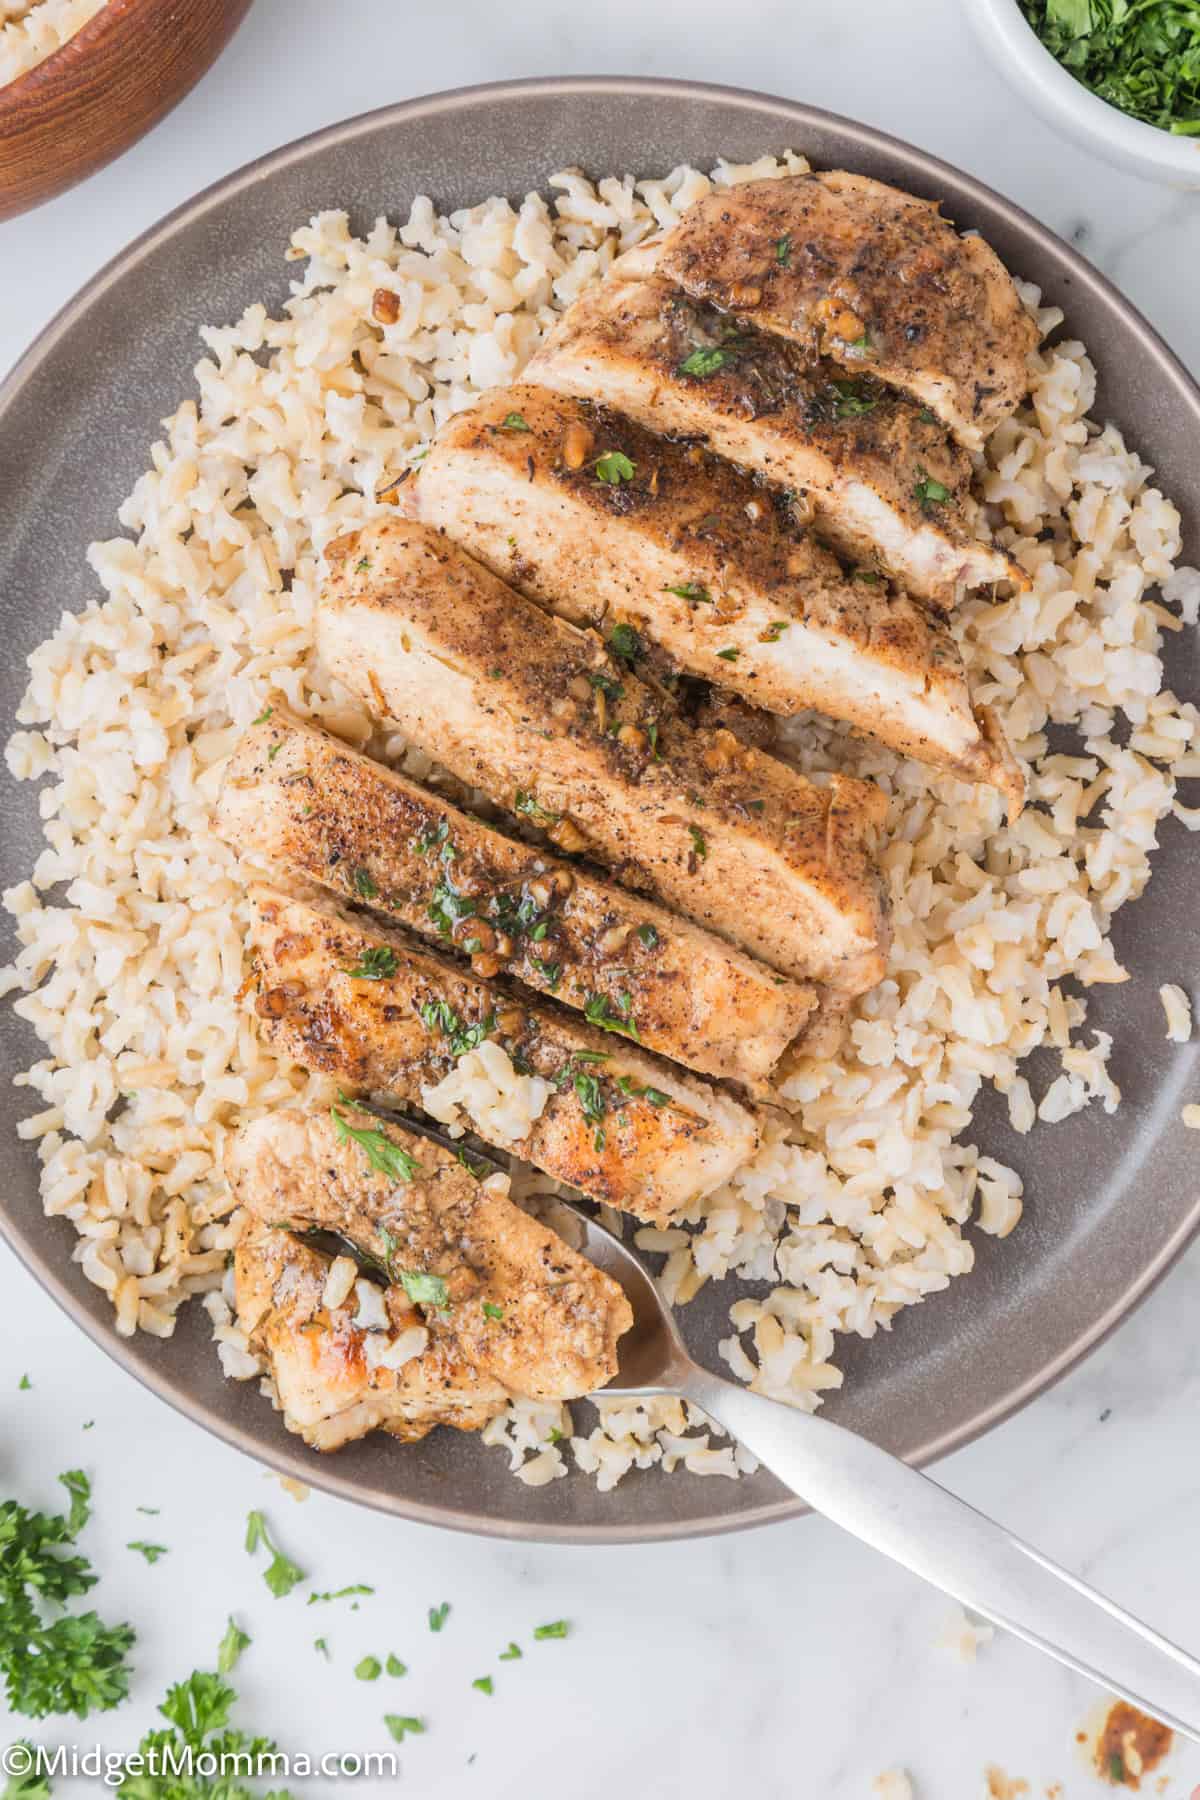 A plate with sliced seasoned chicken breast served on a bed of rice. A fork is placed beside the chicken. Fresh herbs are sprinkled on top.